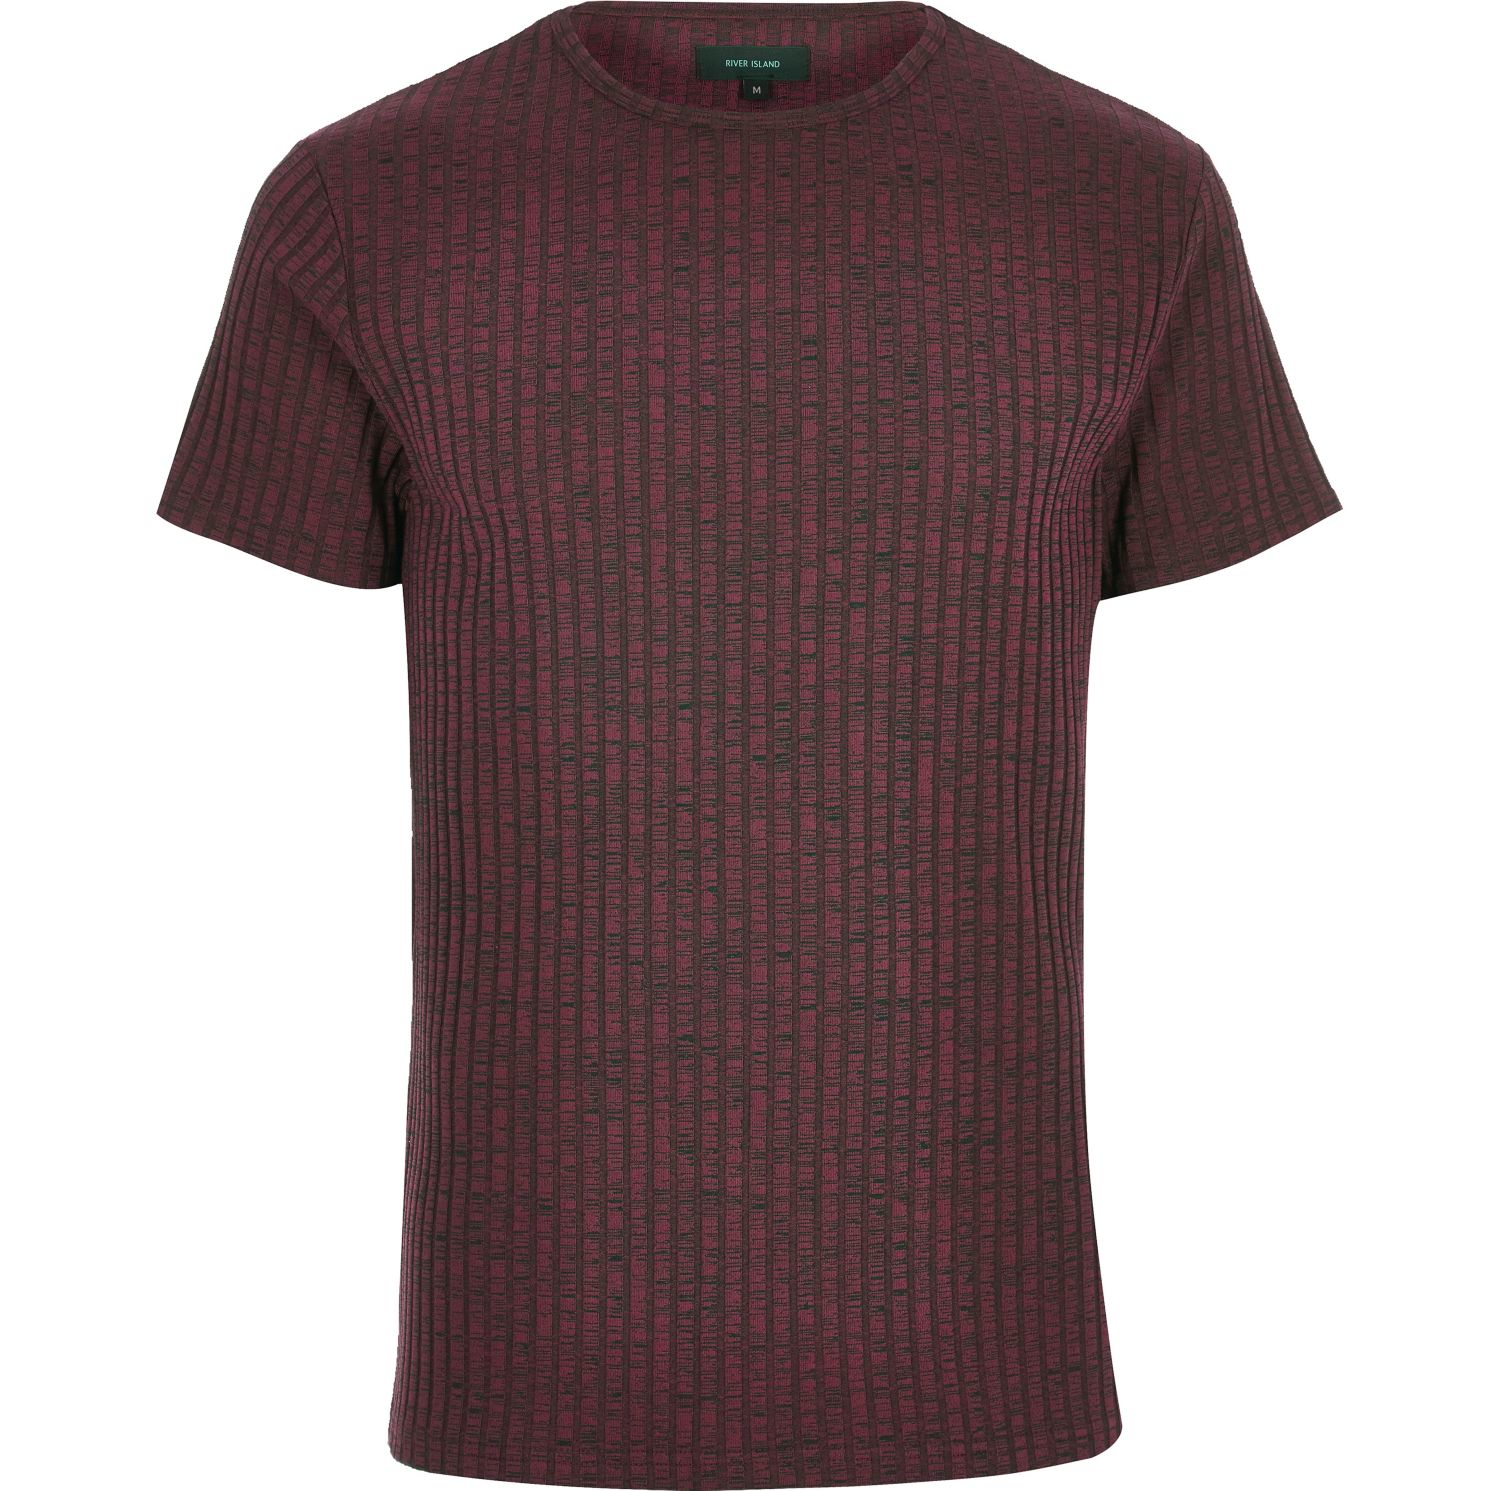 River Island Dark Red Ribbed Short Sleeve T-shirt in Red for Men - Lyst